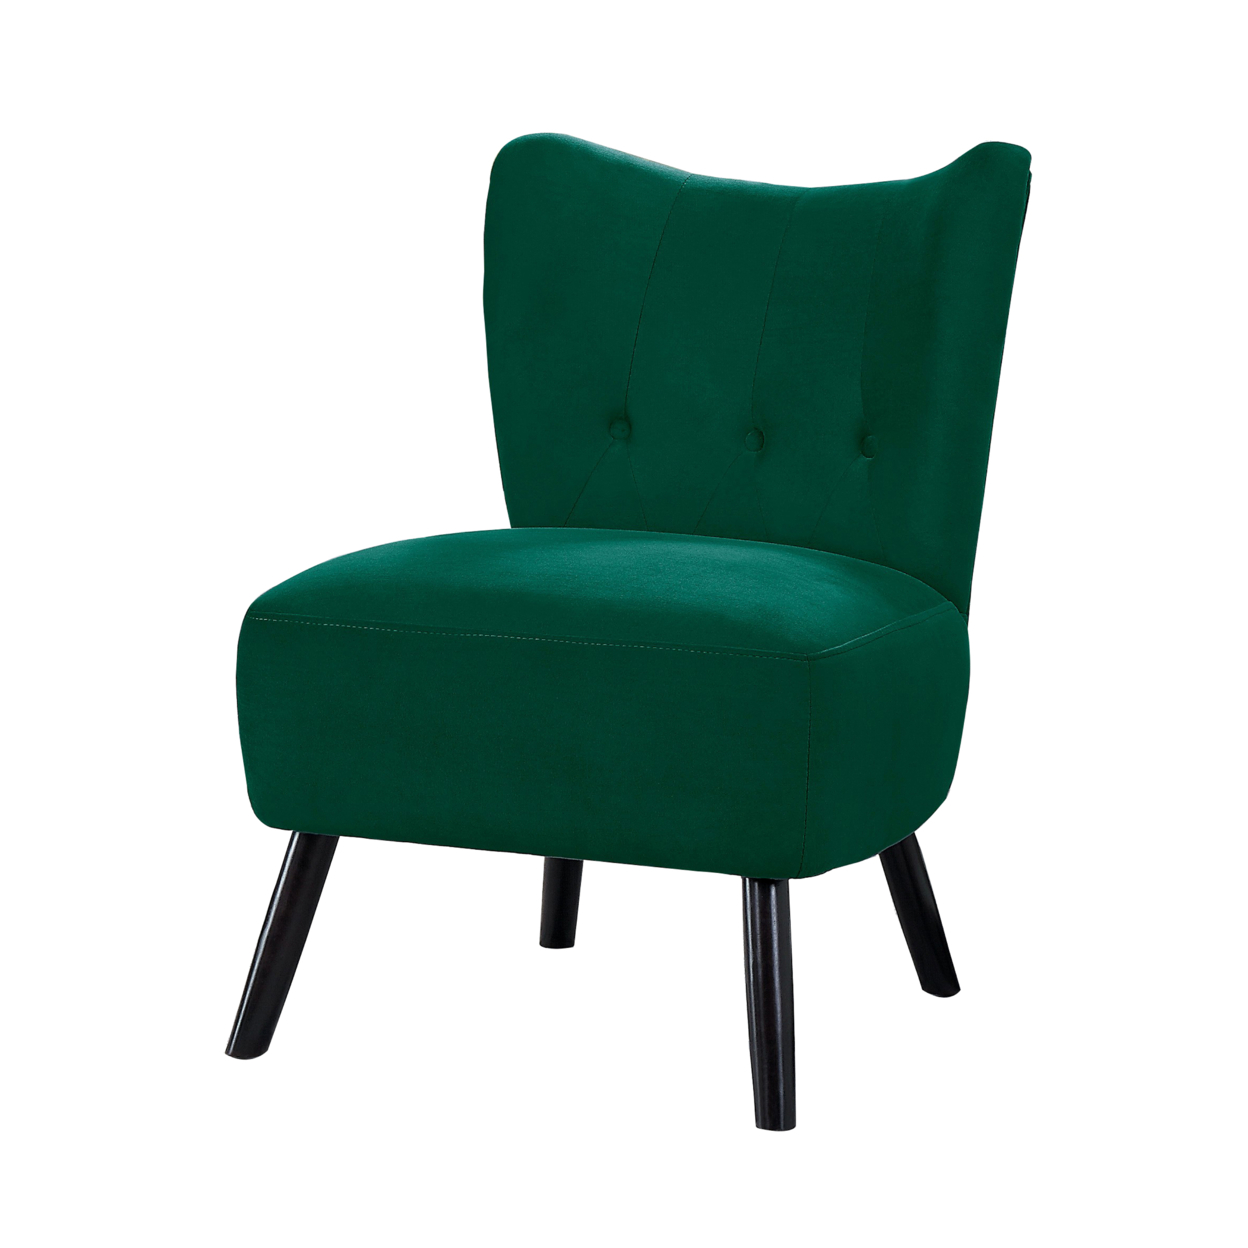 Upholstered Armless Accent Chair With Flared Back And Button Tufting, Green- Saltoro Sherpi